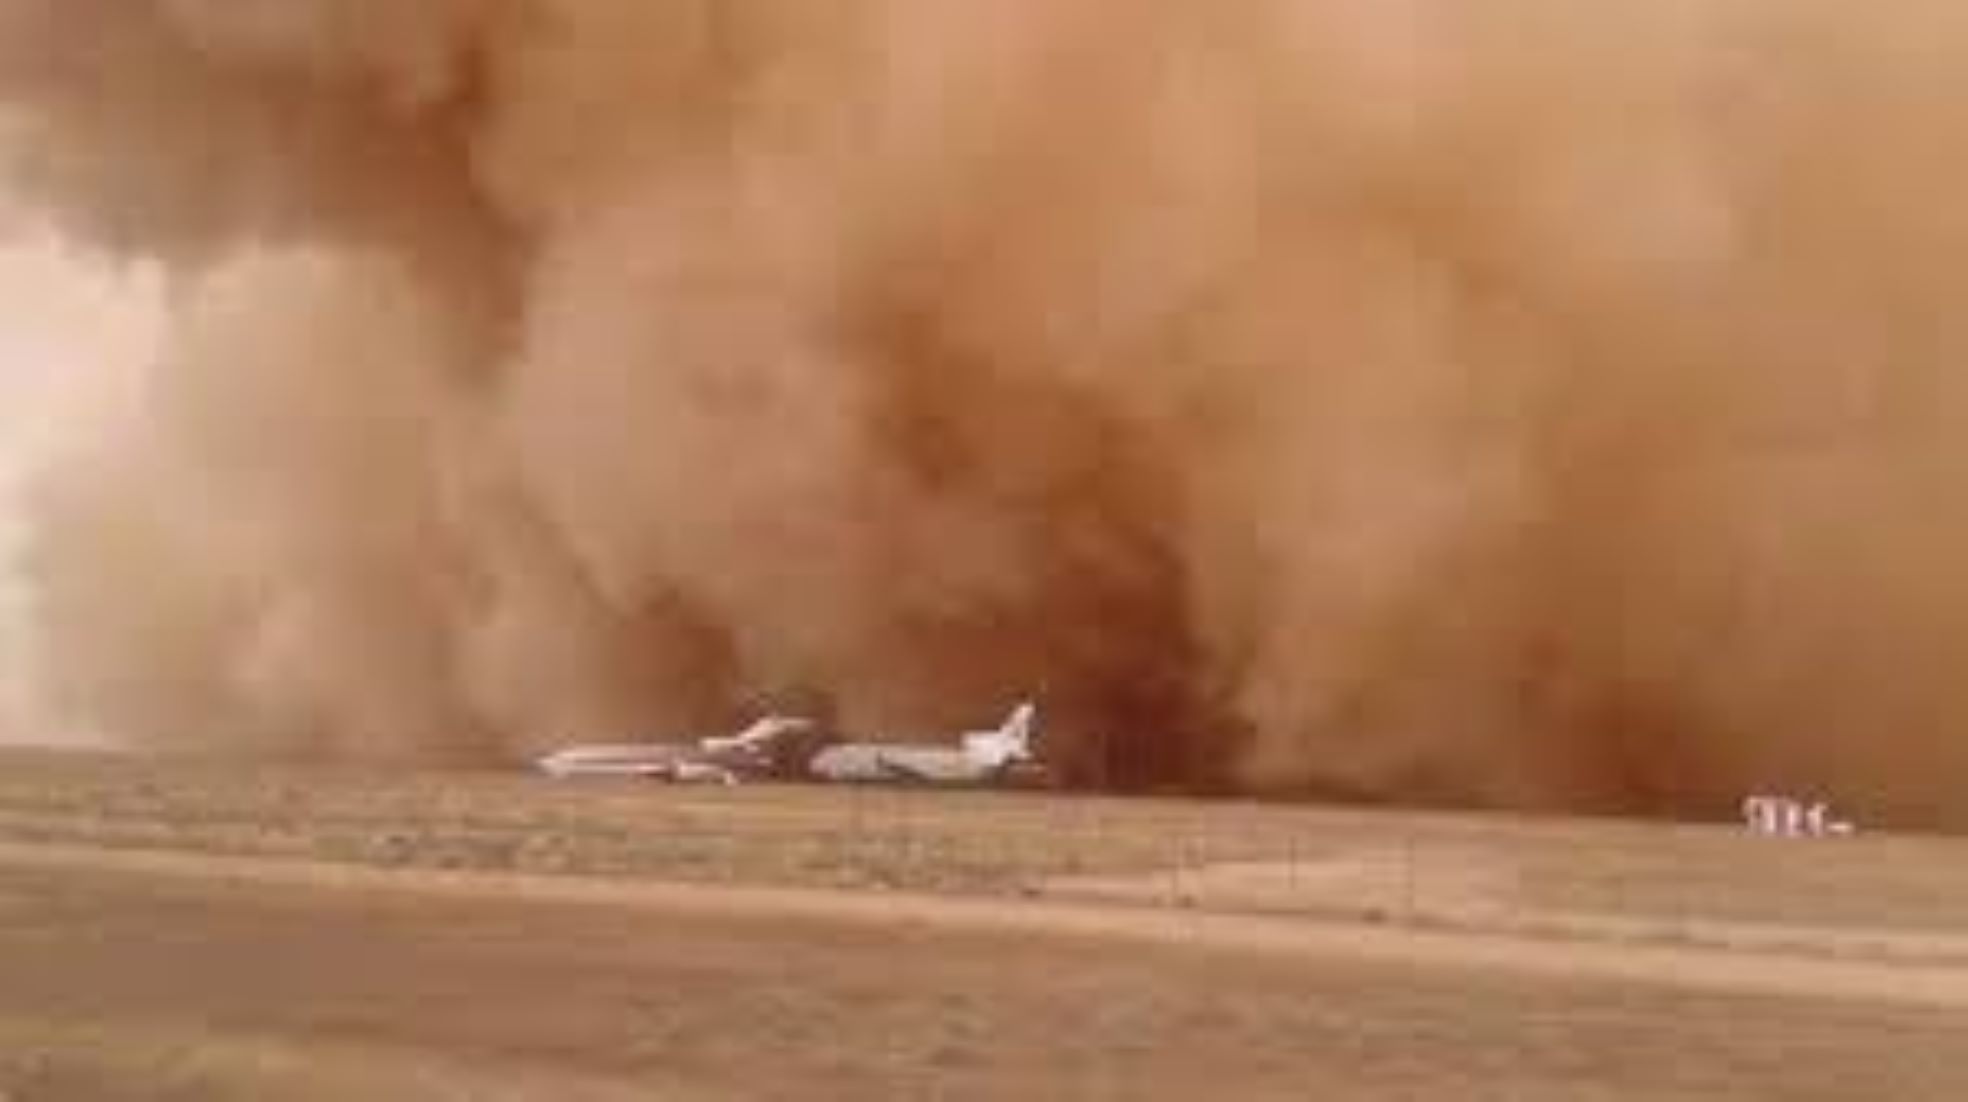 Royal Jordanian Flight Forced Back To Amman Due To Dust Storm